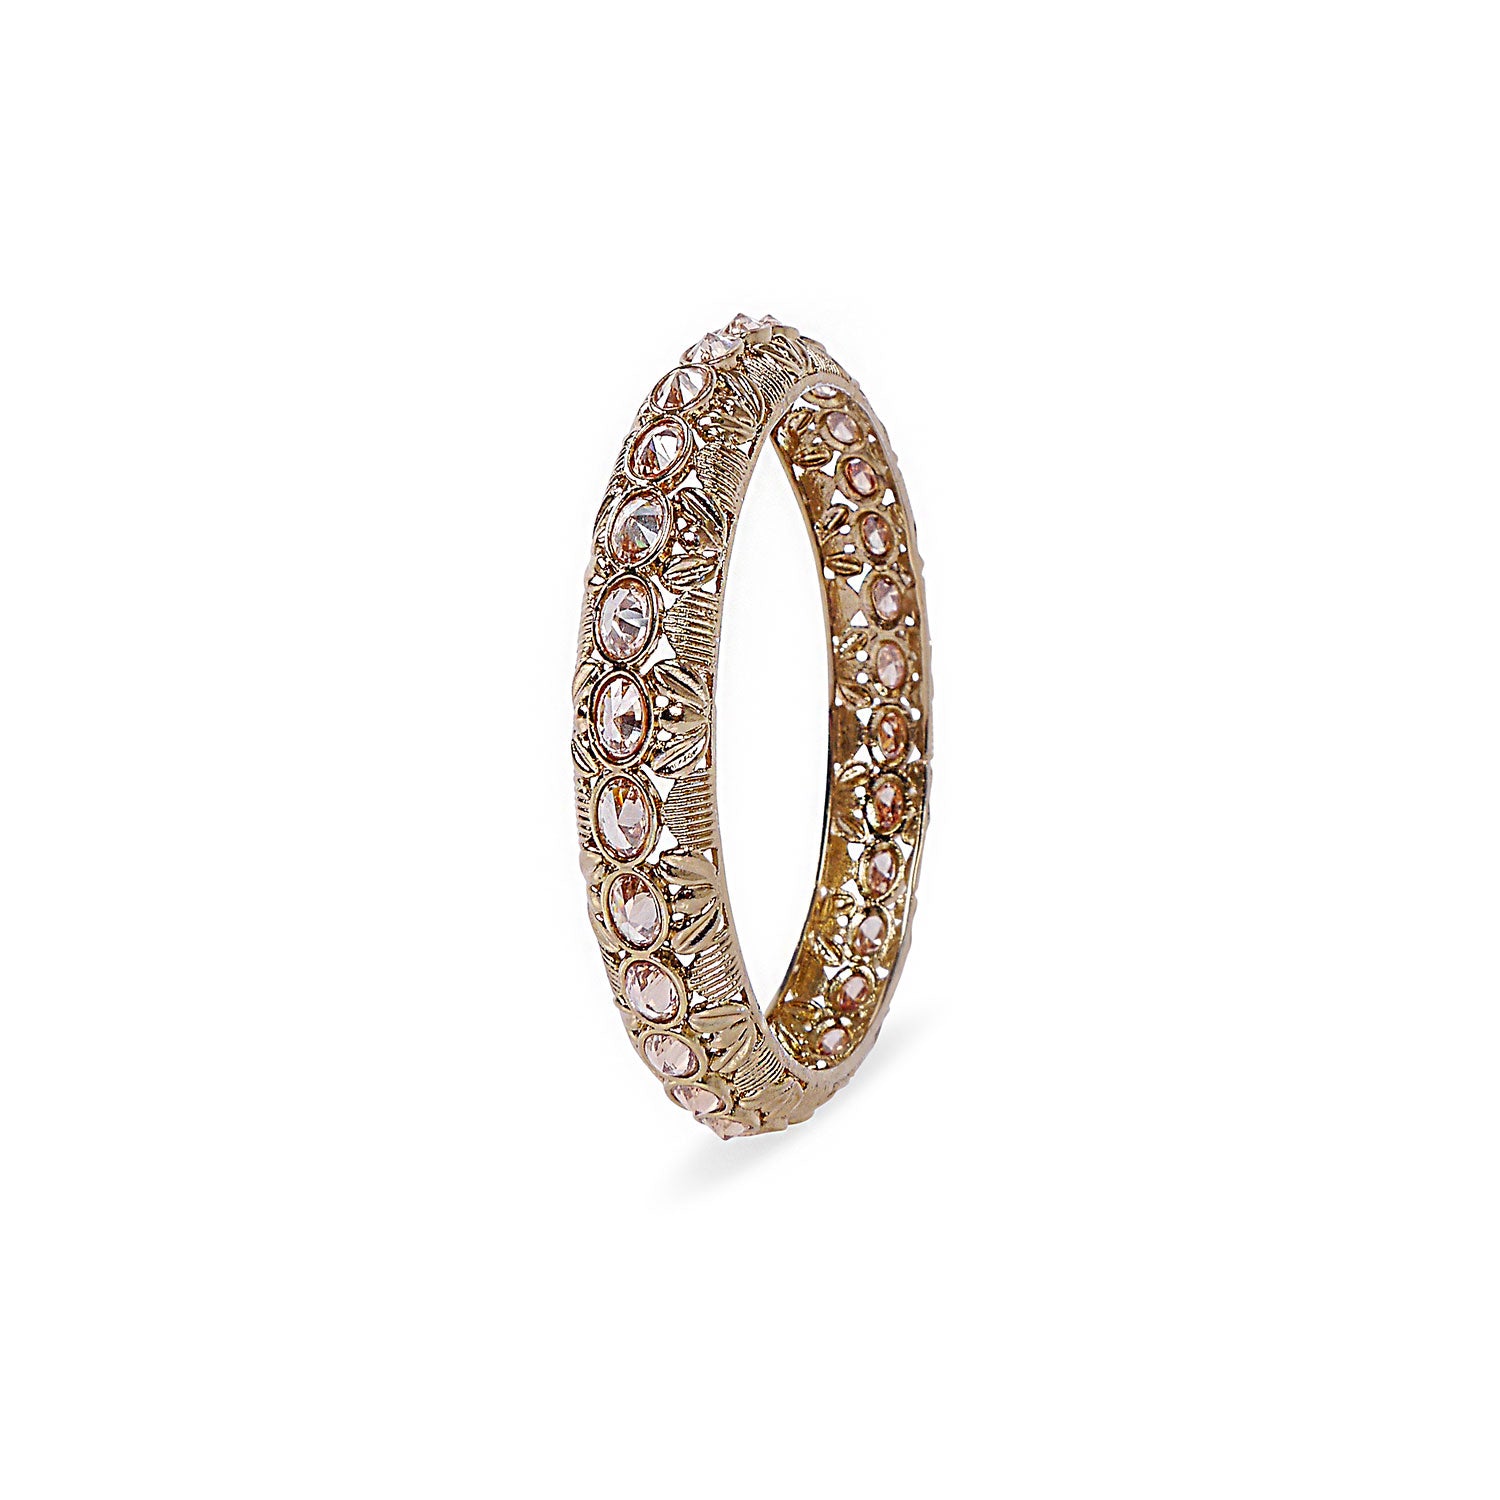 Oval Classic Bangle in Antique Gold